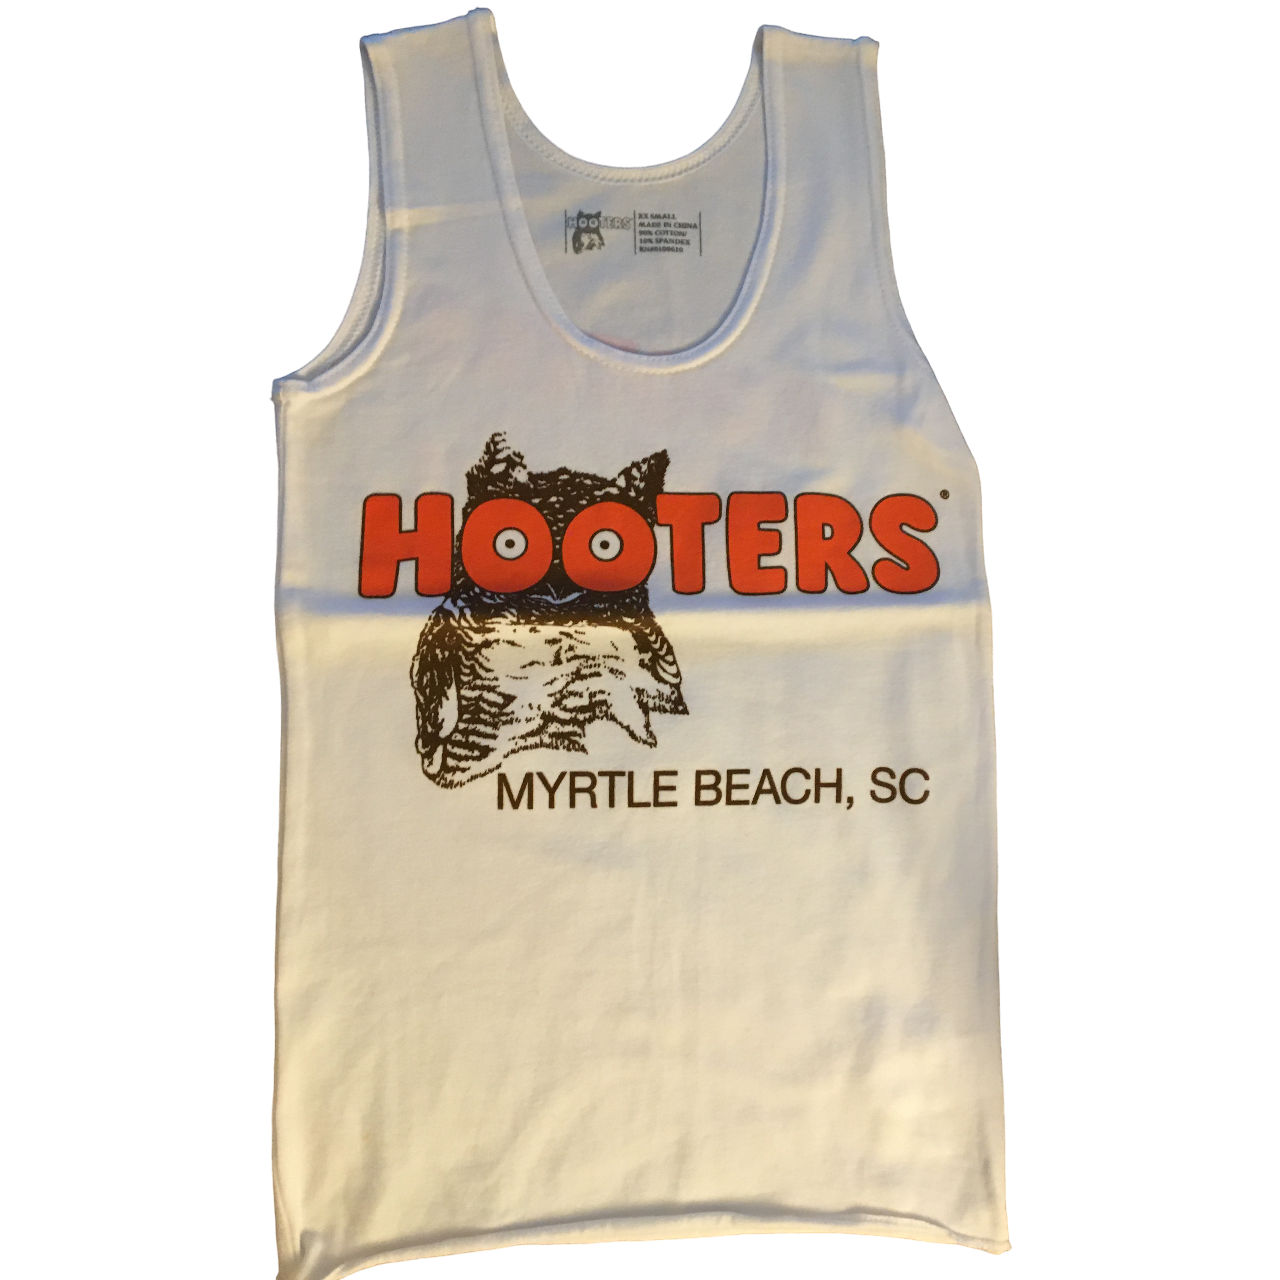 Myrtle Bch Hooters Women's Outfit Costume White Tank Top